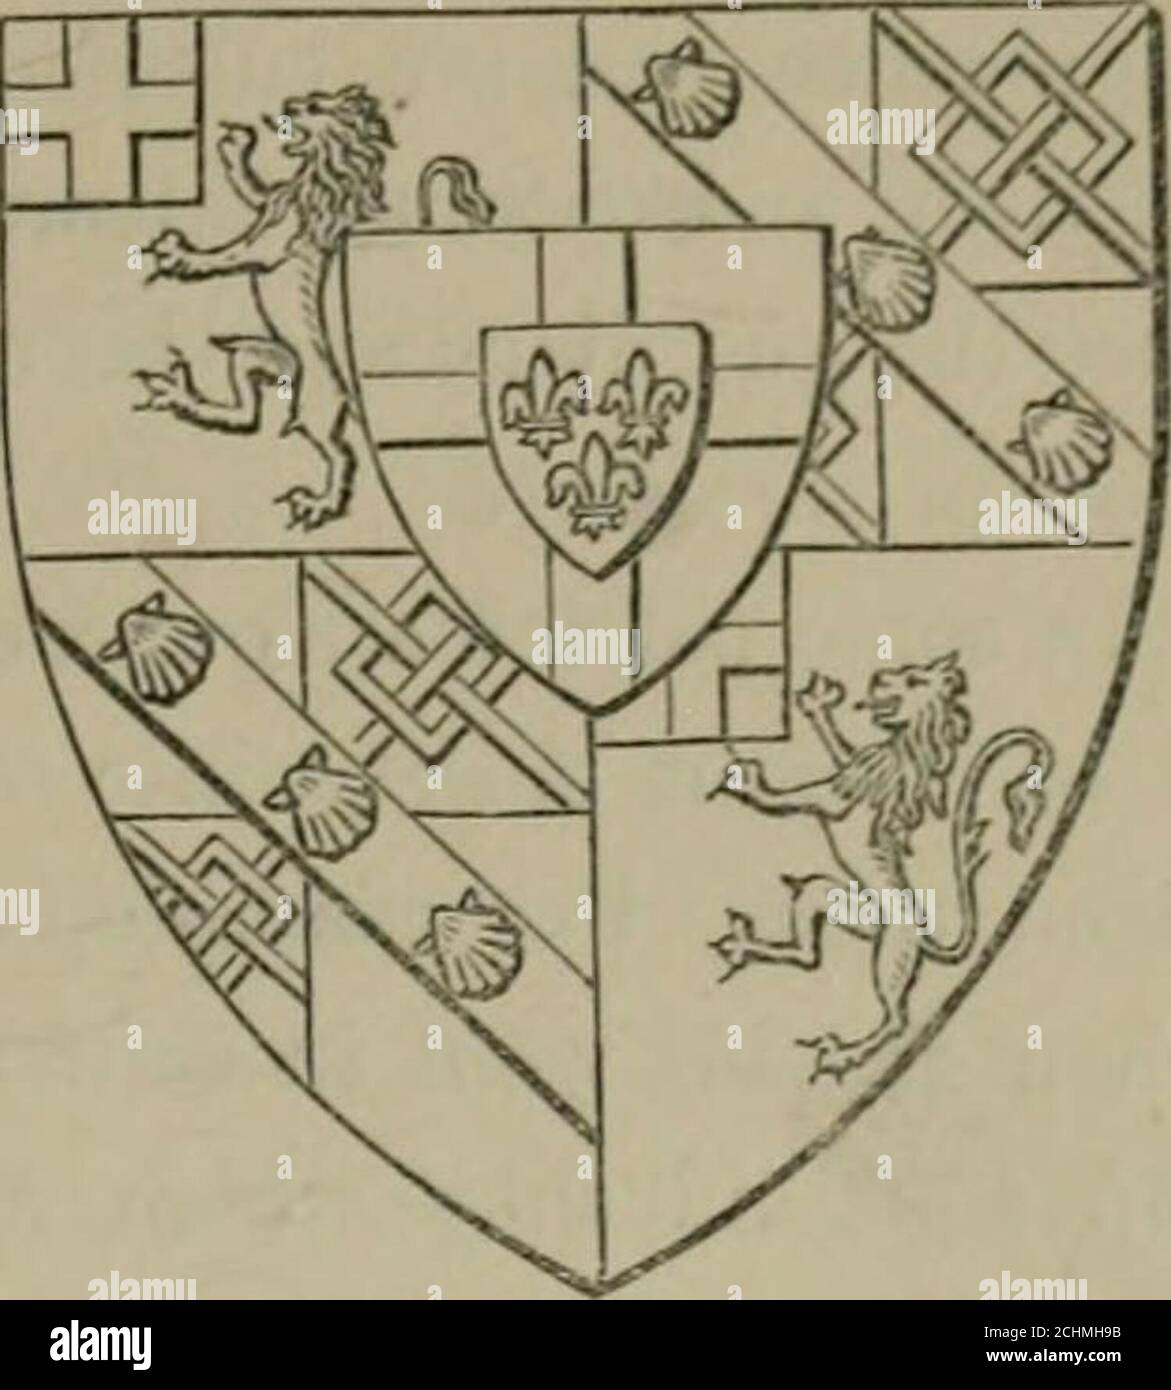 . Heraldry, historical and popular . No. 614.—Arthur Wellesley, No. 615.—Spencer CnrRCHiLL, Duke of Wellington. Diike of Marlbokocgh. See pp. 435, 436 aud 443. CHAPTER XXIX. MODERN HERALDRY. When not historical of the past, it is the office of all tiueHeraldry to be historical for the future. Our Modem Heraldrj^accordingly, if it would be consistent Avith both its characterand its traditions, must take a becoming part in producing thatChapter of English History which we shall hand down tosucceeding generations. It is indeed true that the state ofthings has undergone a marvellous change since H Stock Photo